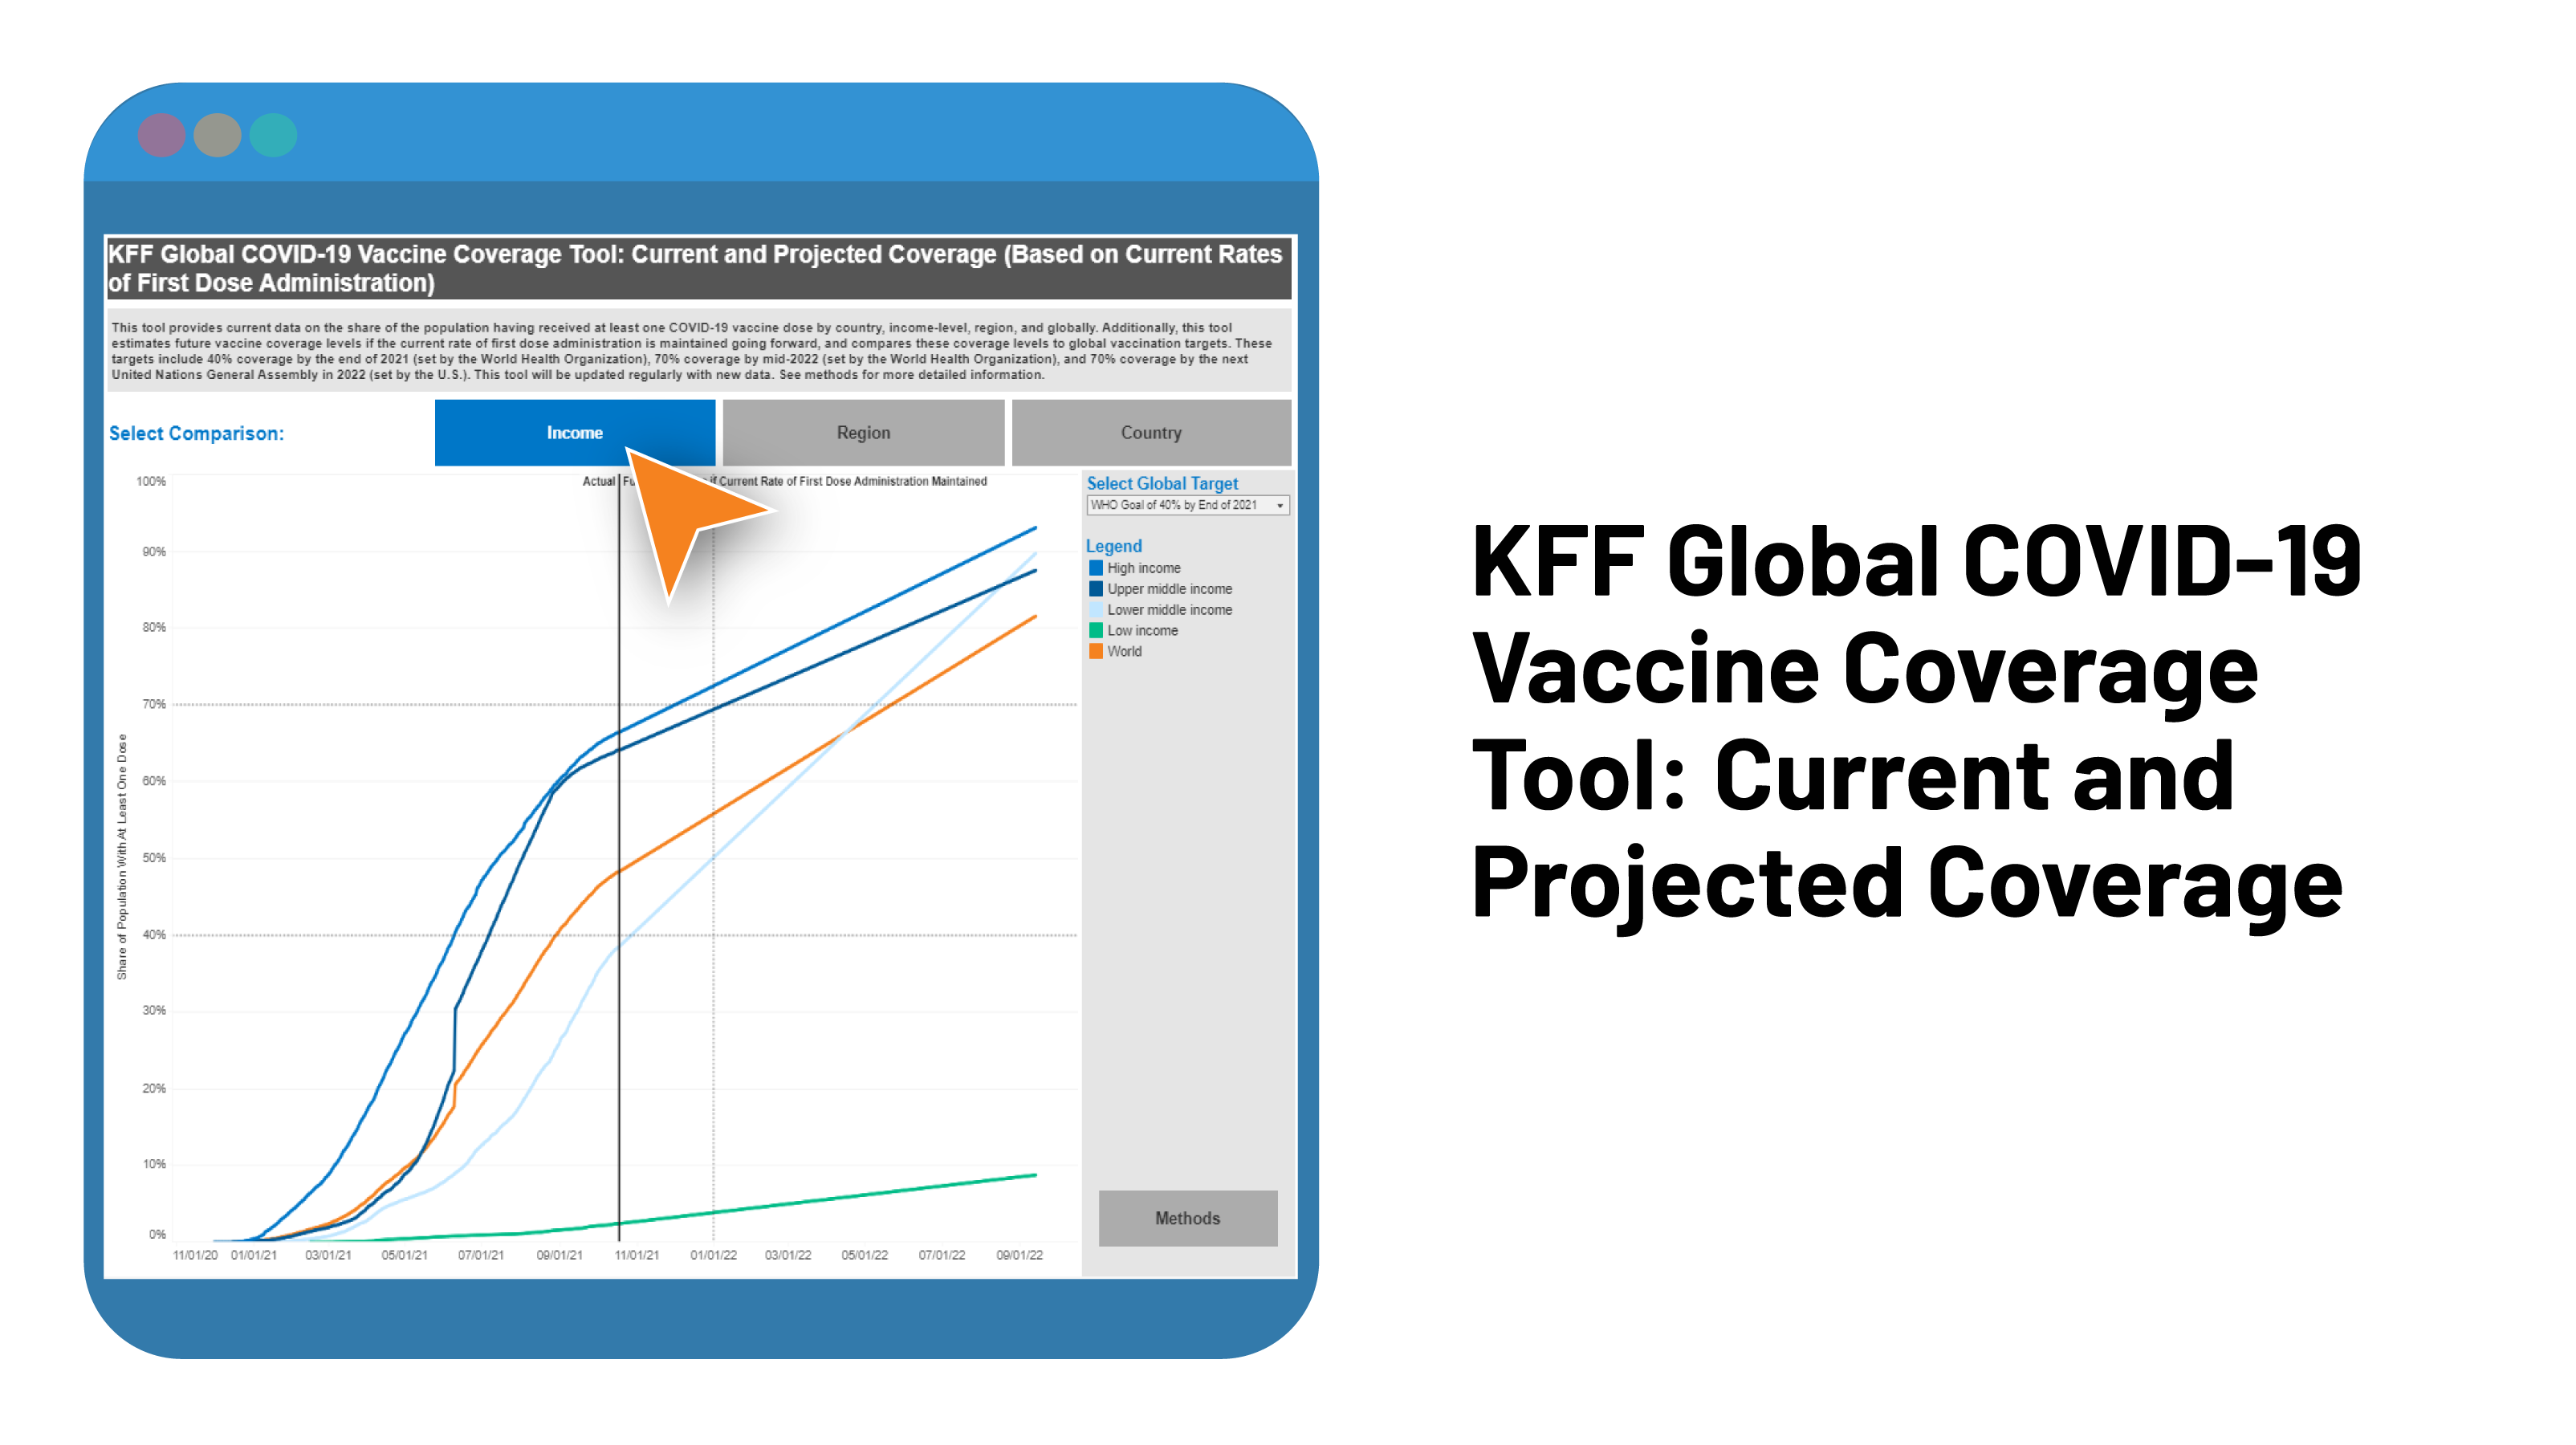 KFF Global COVID-19 Vaccine Coverage Tool: Current and Projected Coverage – Updated as of September 23